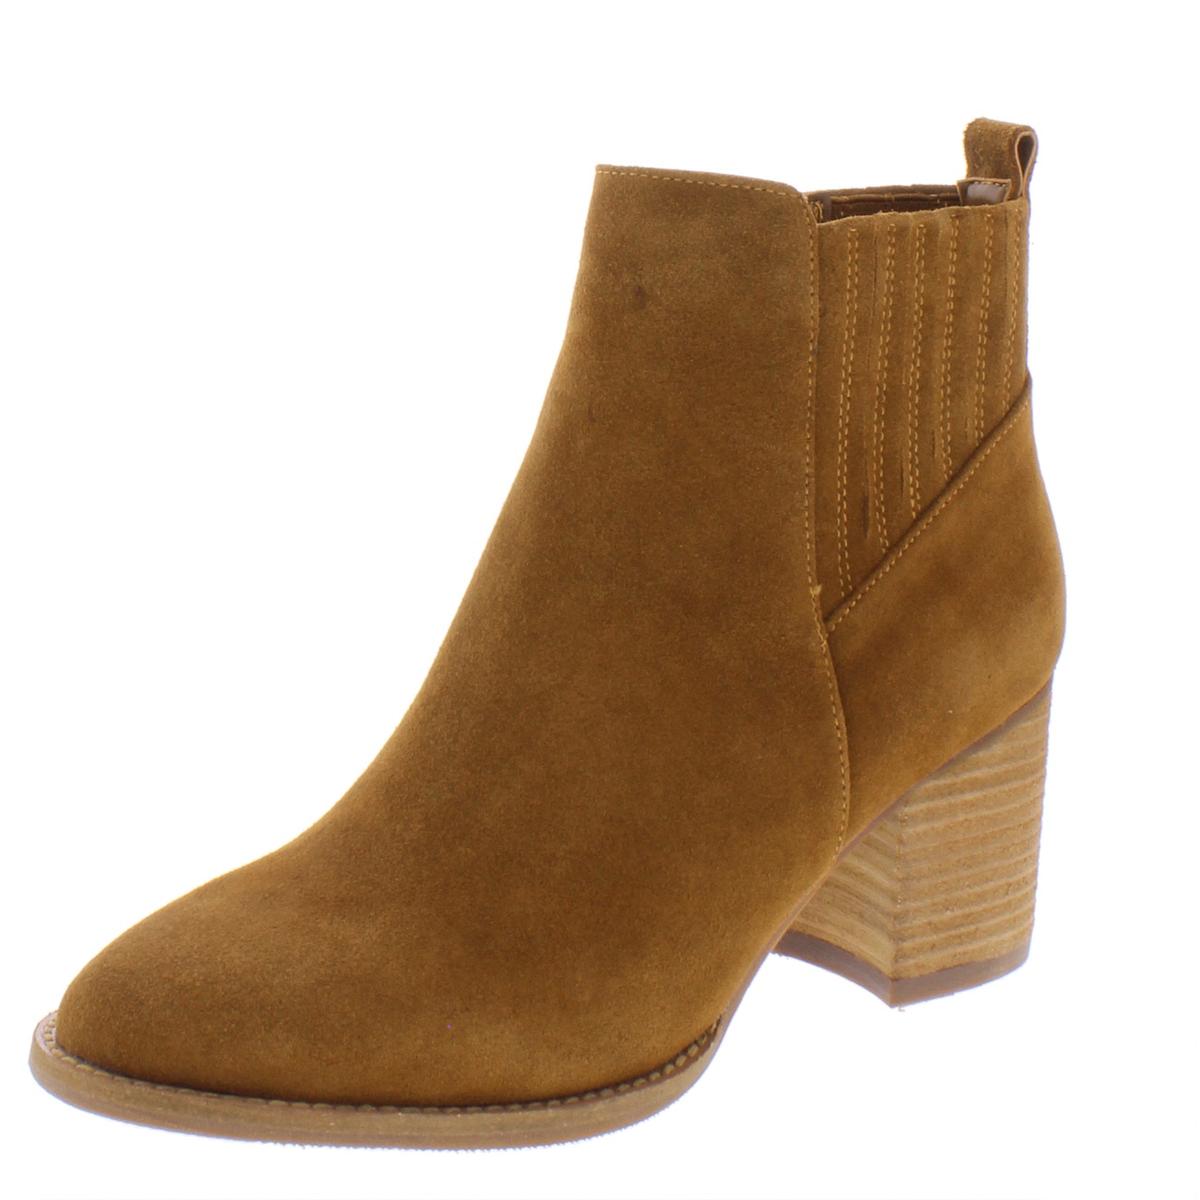 Blondo Womens NOA Brown Suede Ankle Boots Shoes 8 Medium (B,M) BHFO ...